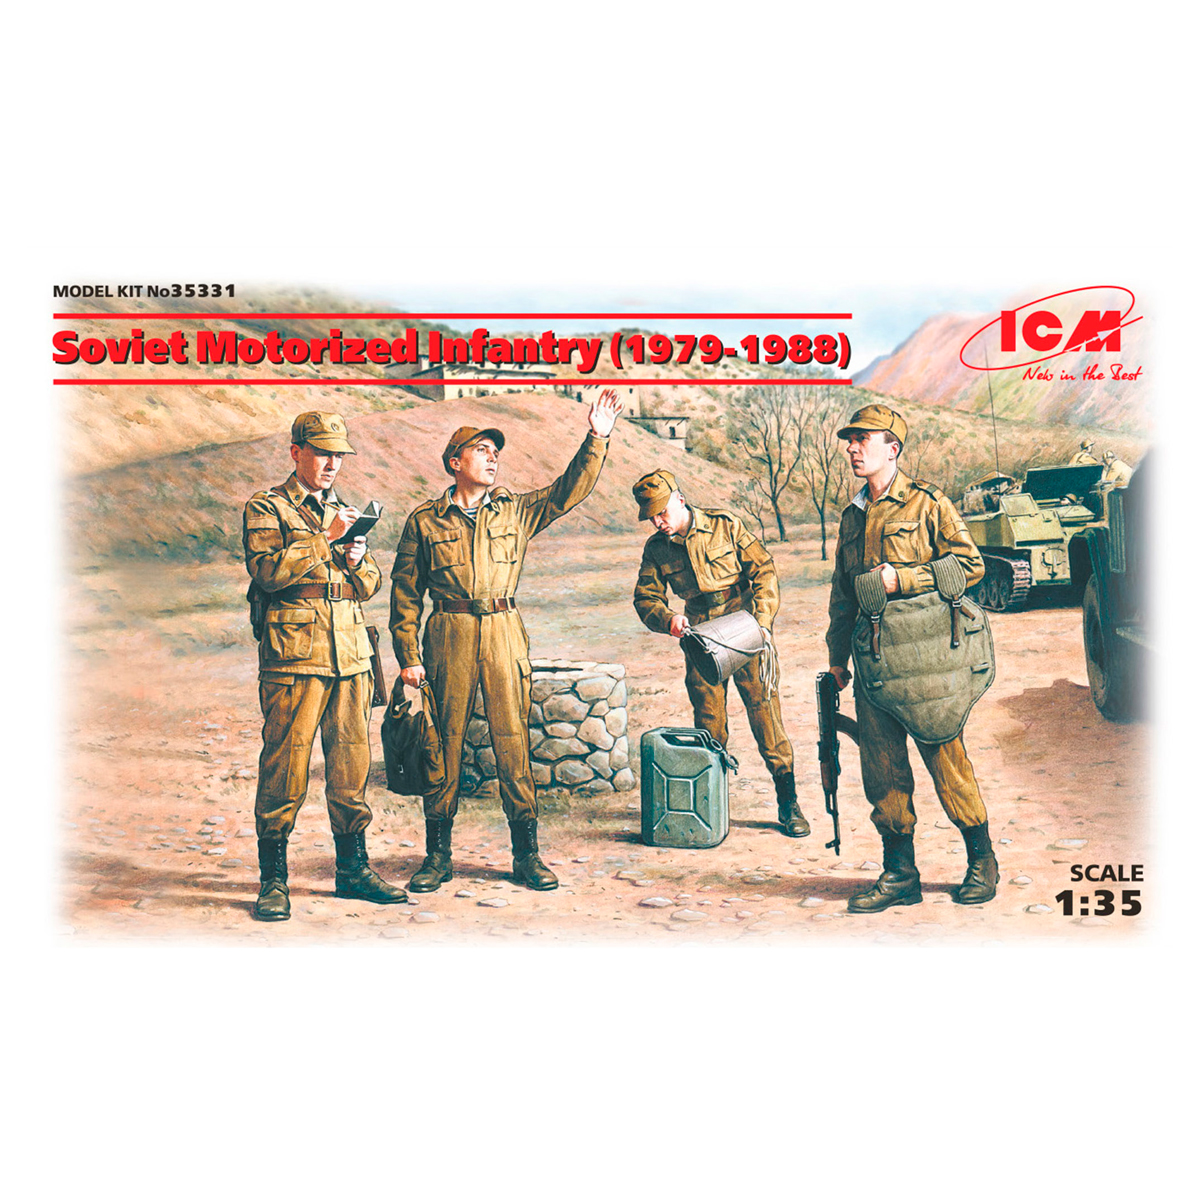 Soviet Motorized Infantry (1979-1988) (4 figures – 1 officer, 3 soldiers) 1/35